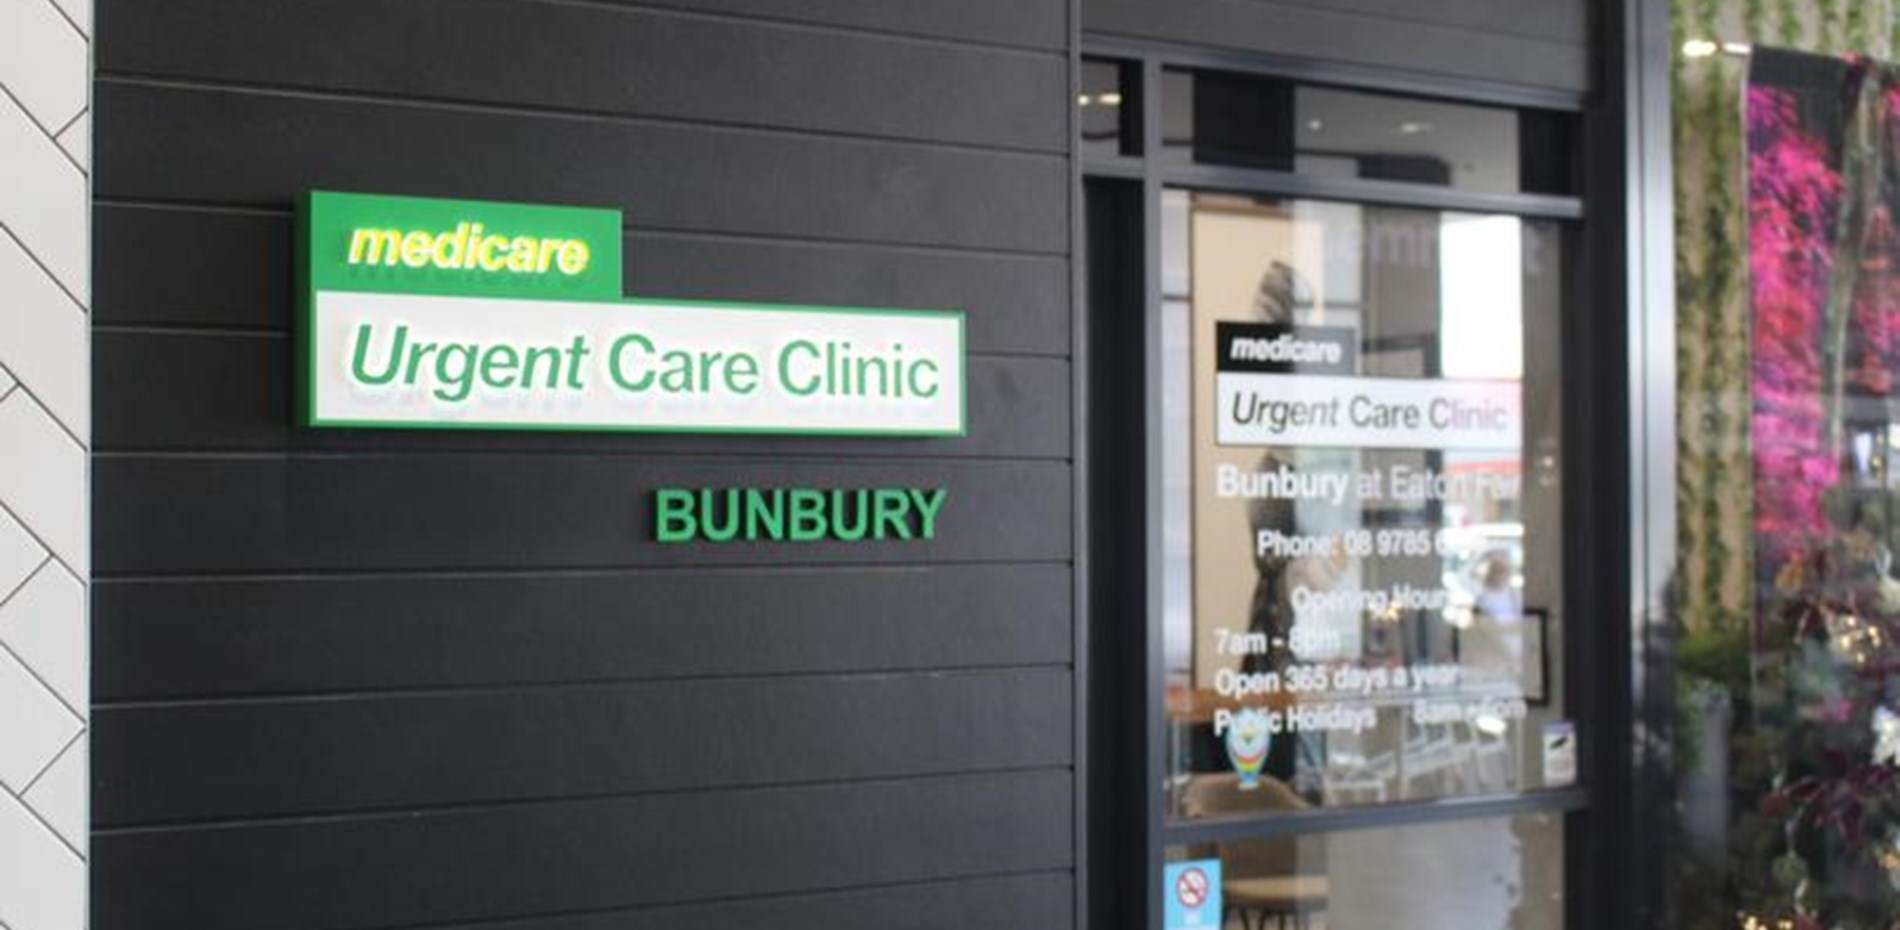 Media Release - MEDICARE URGENT CARE CLINIC OPENS IN GREATER BUNBURY Main Image